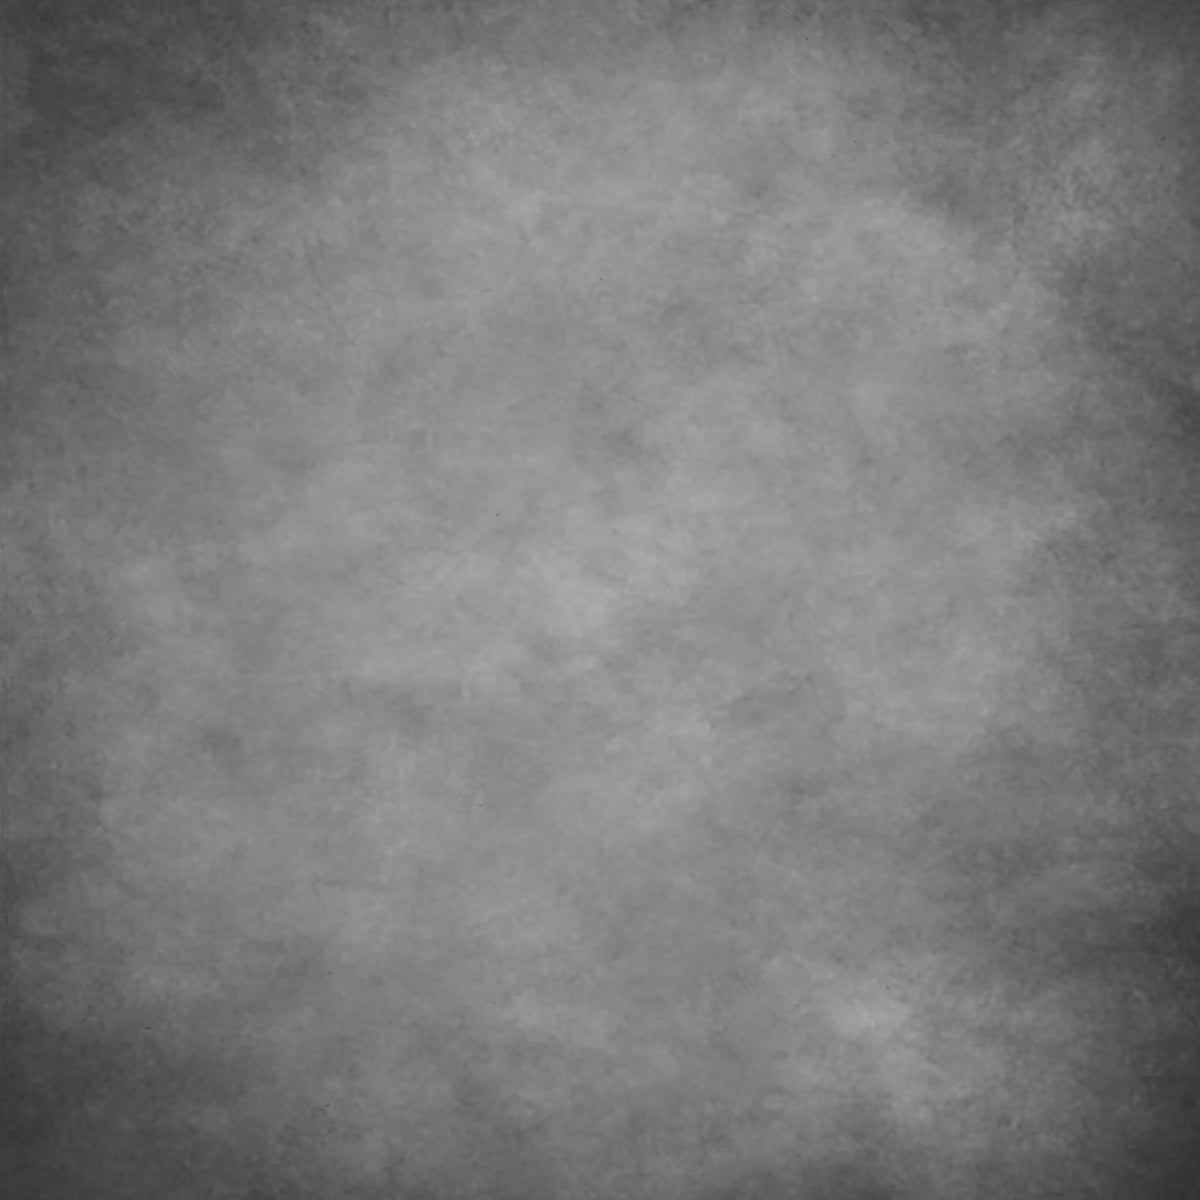 Simon Diez Light Grey Portrait Abstract Backdrops for Photography